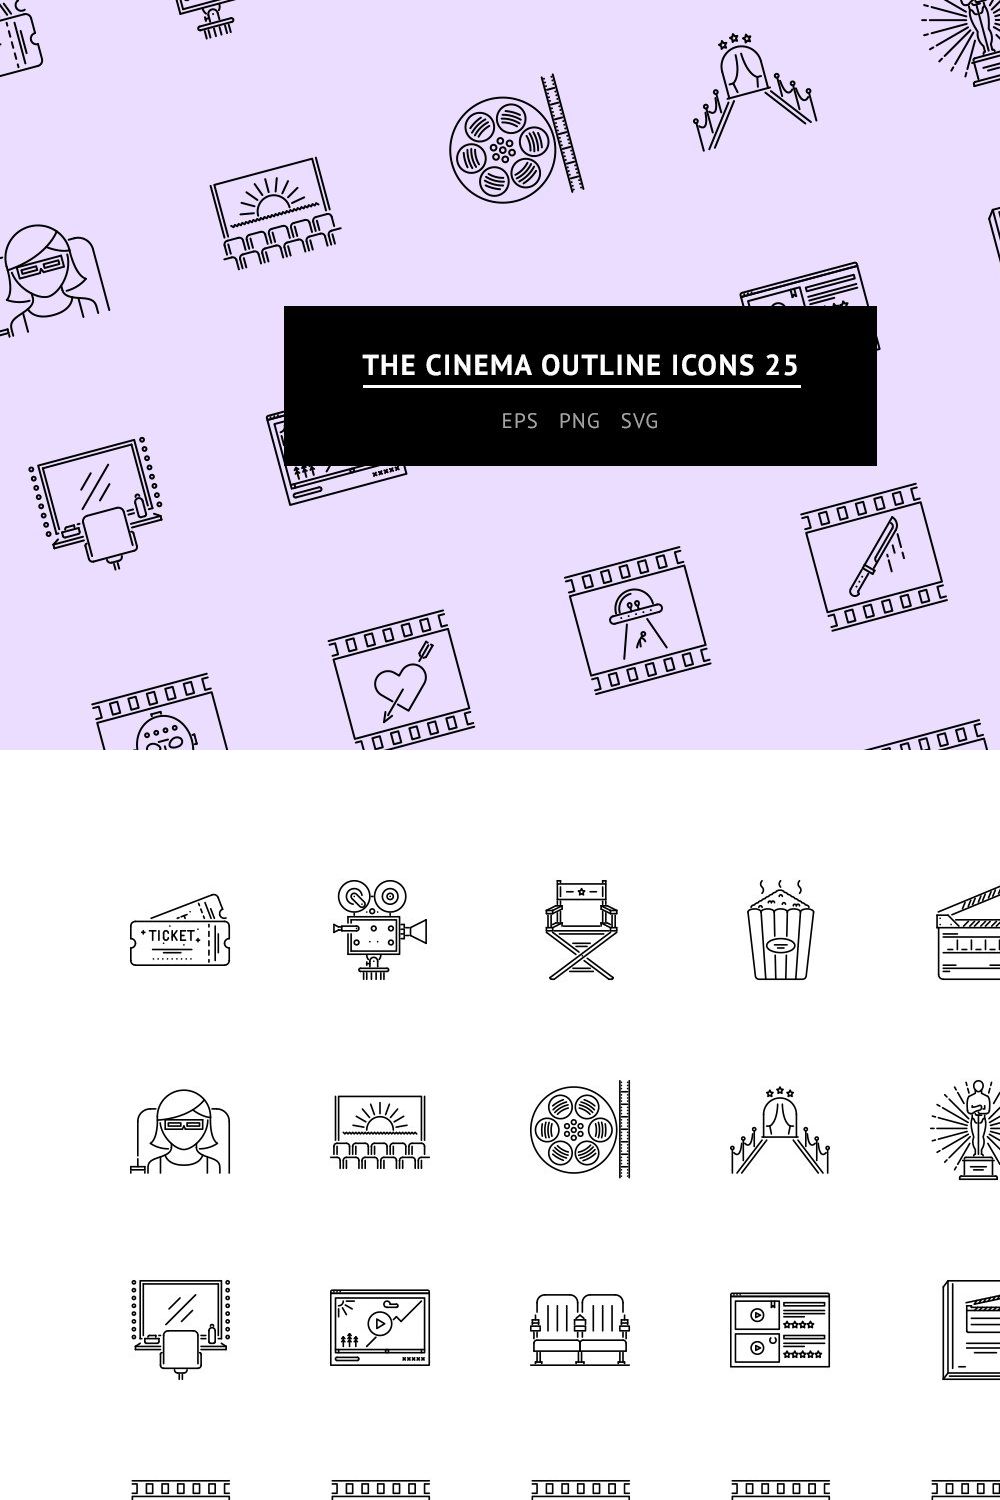 The Cinema Outline Icons 25 pinterest preview image.